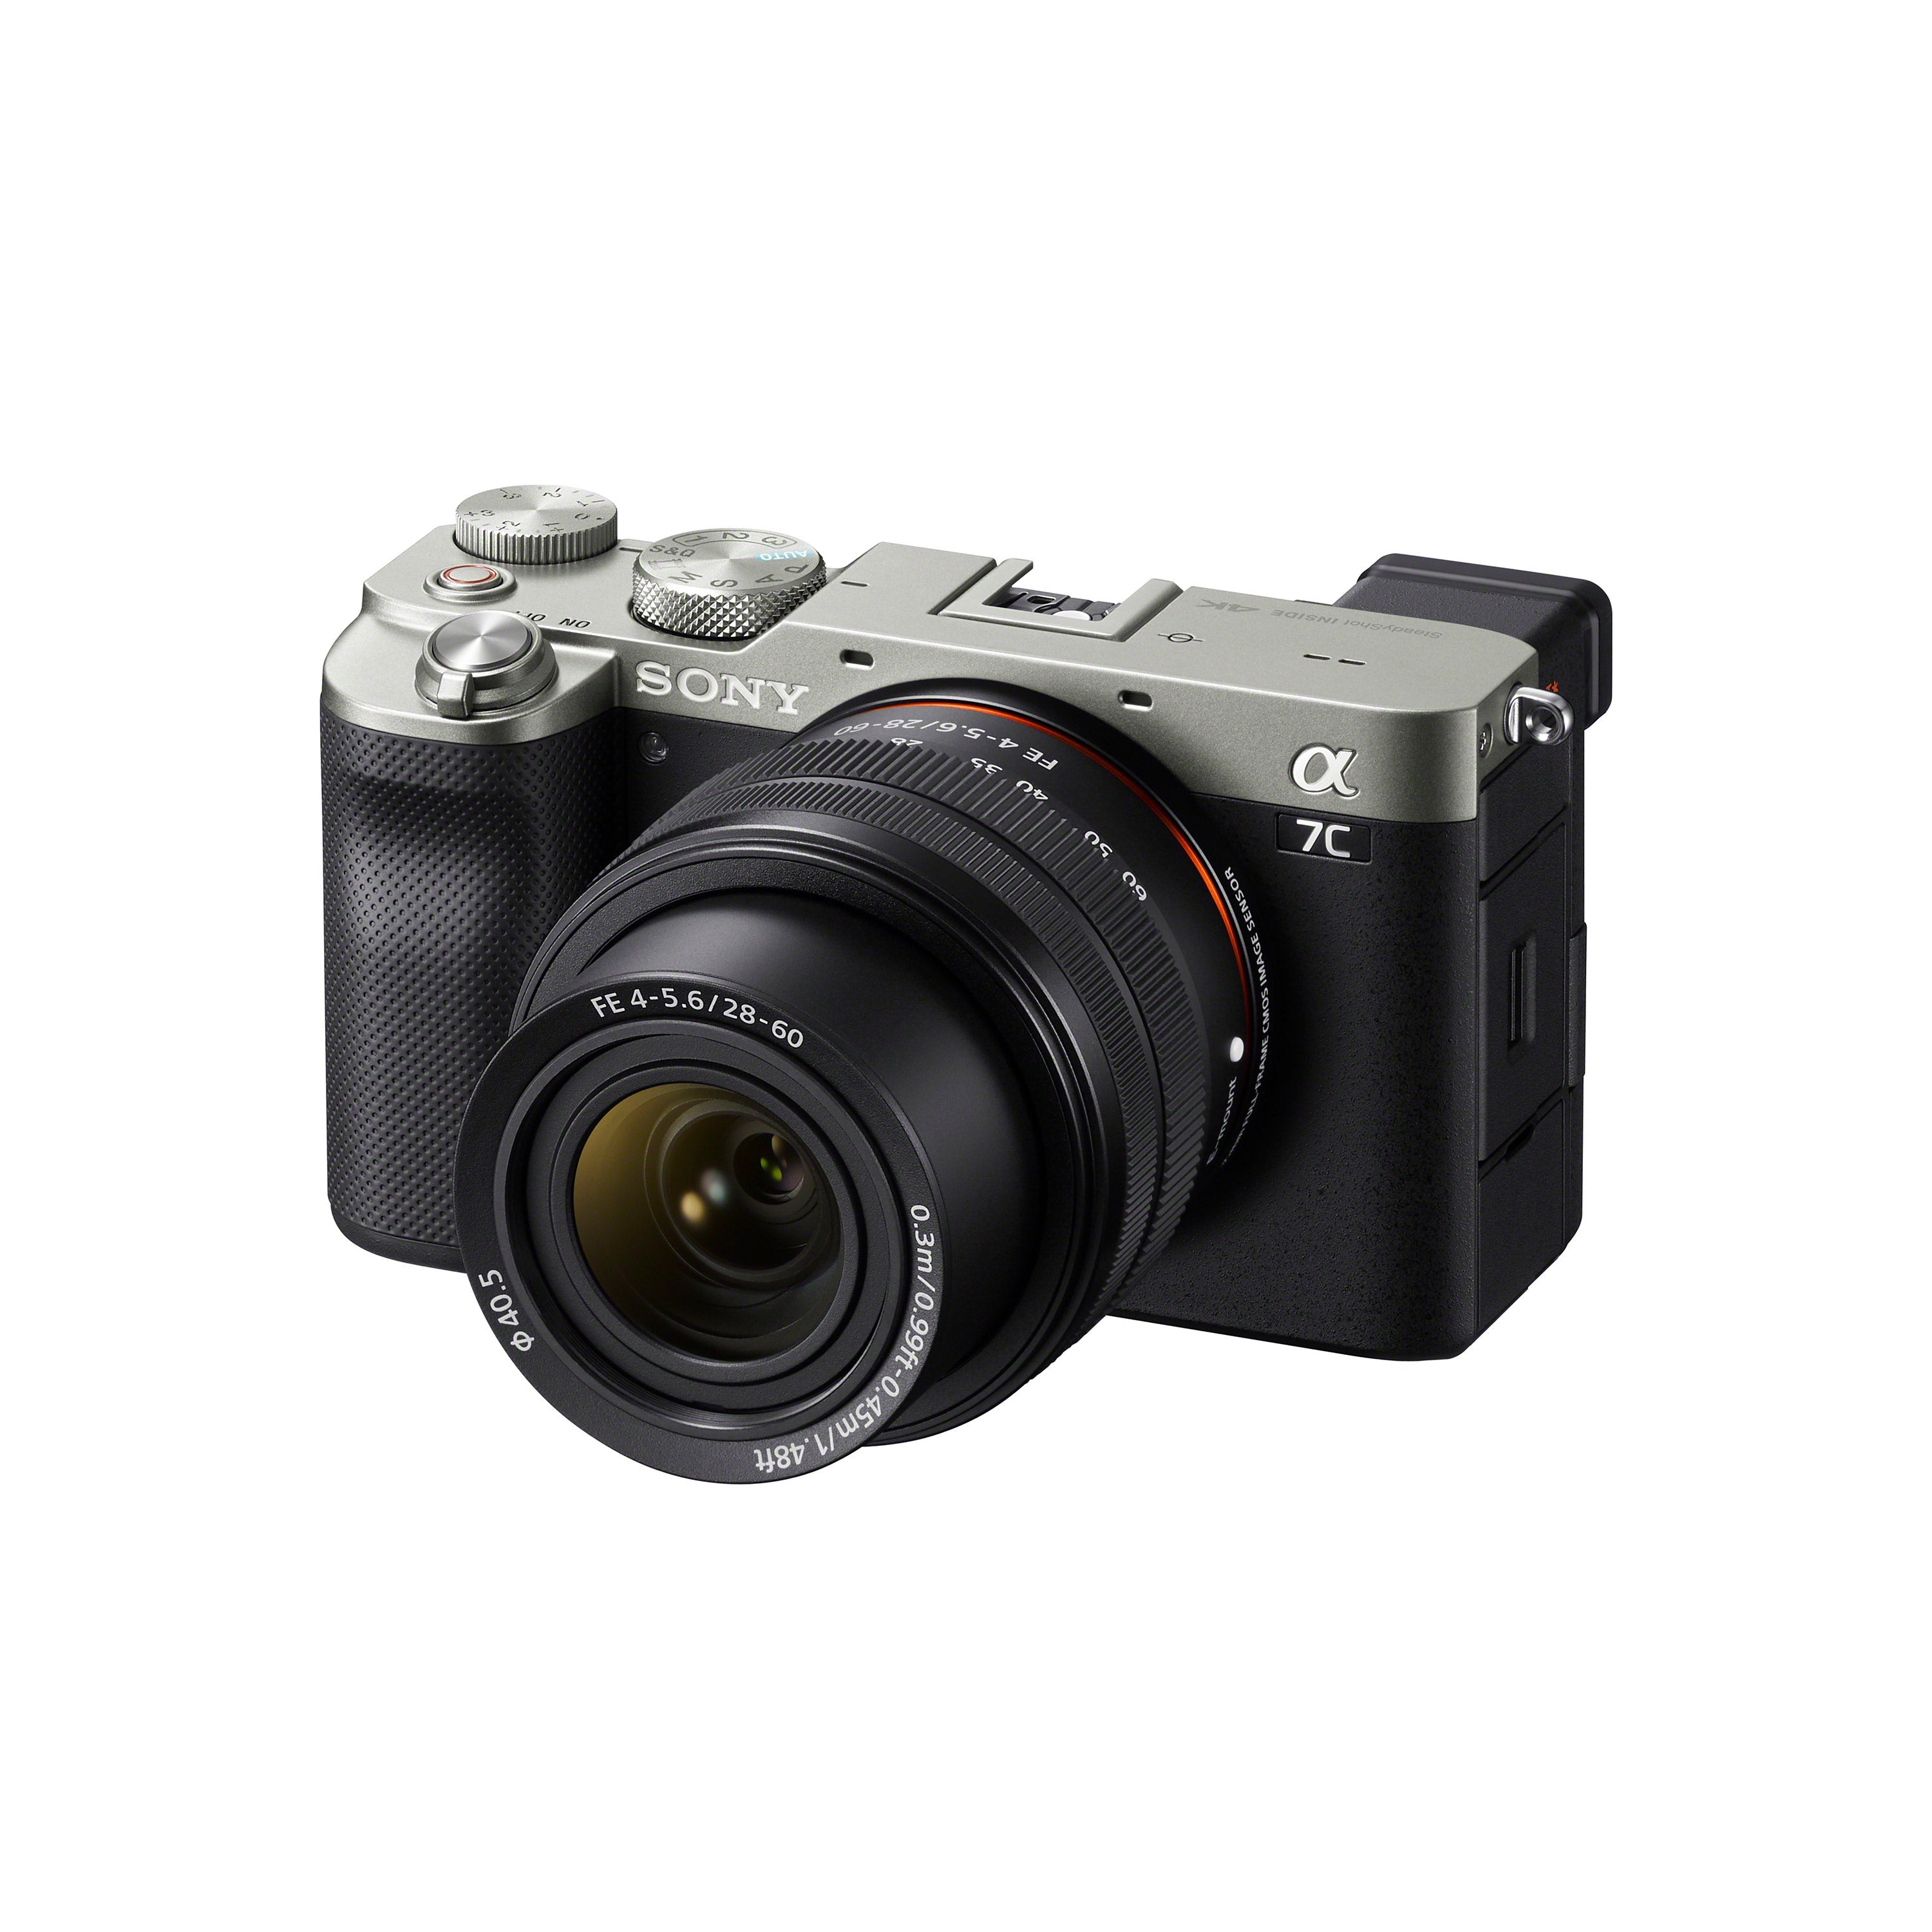 Sony a7C Compact full-frame camera with 28-60mm Lens (Silver)